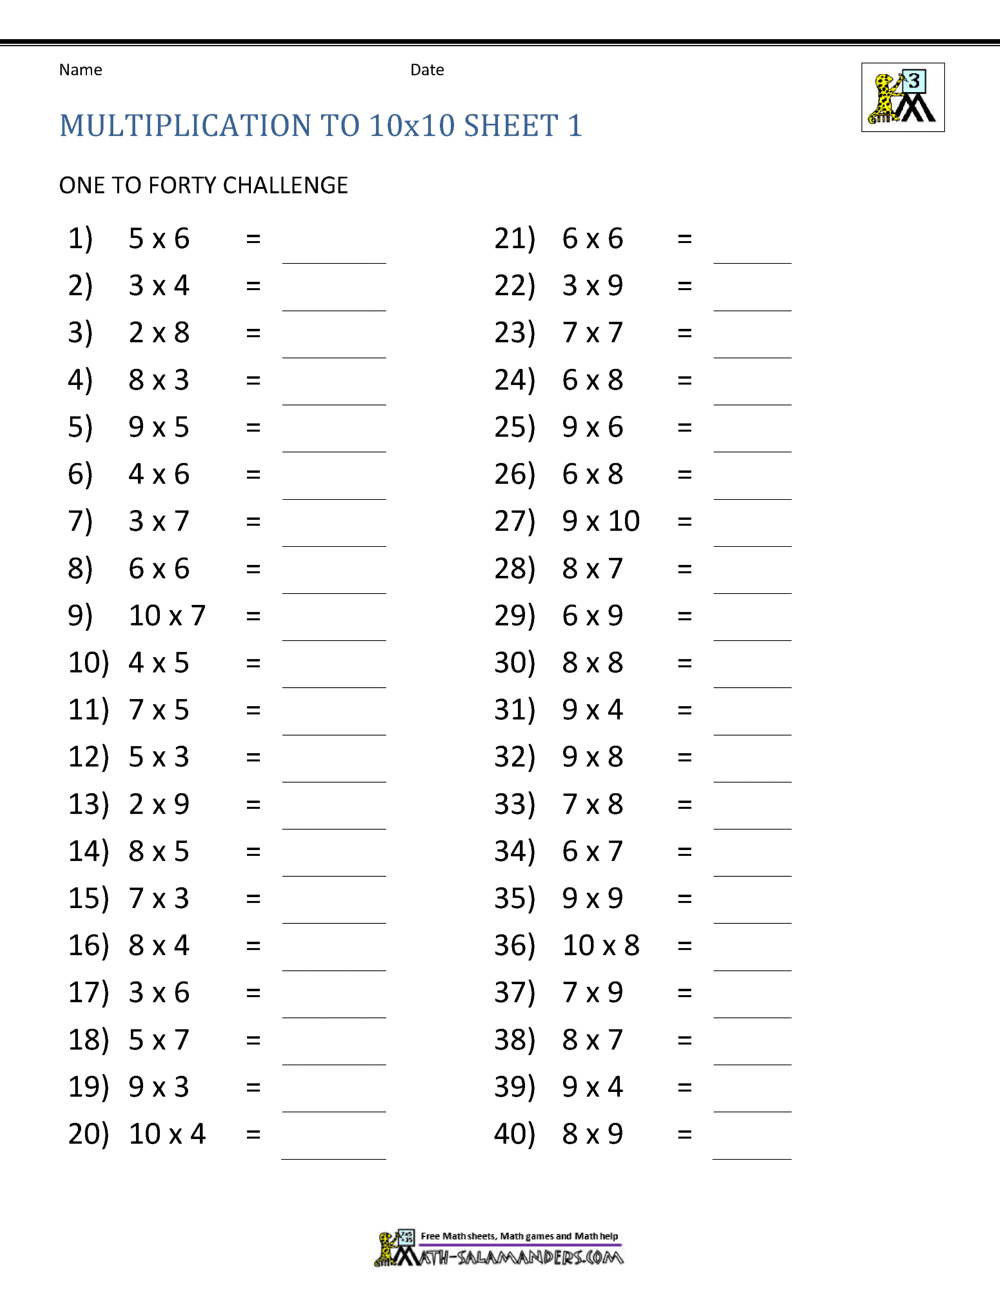 the-multiplying-1-to-12-by-10-a-math-worksheet-from-the-multiplication-worksheets-page-at-math